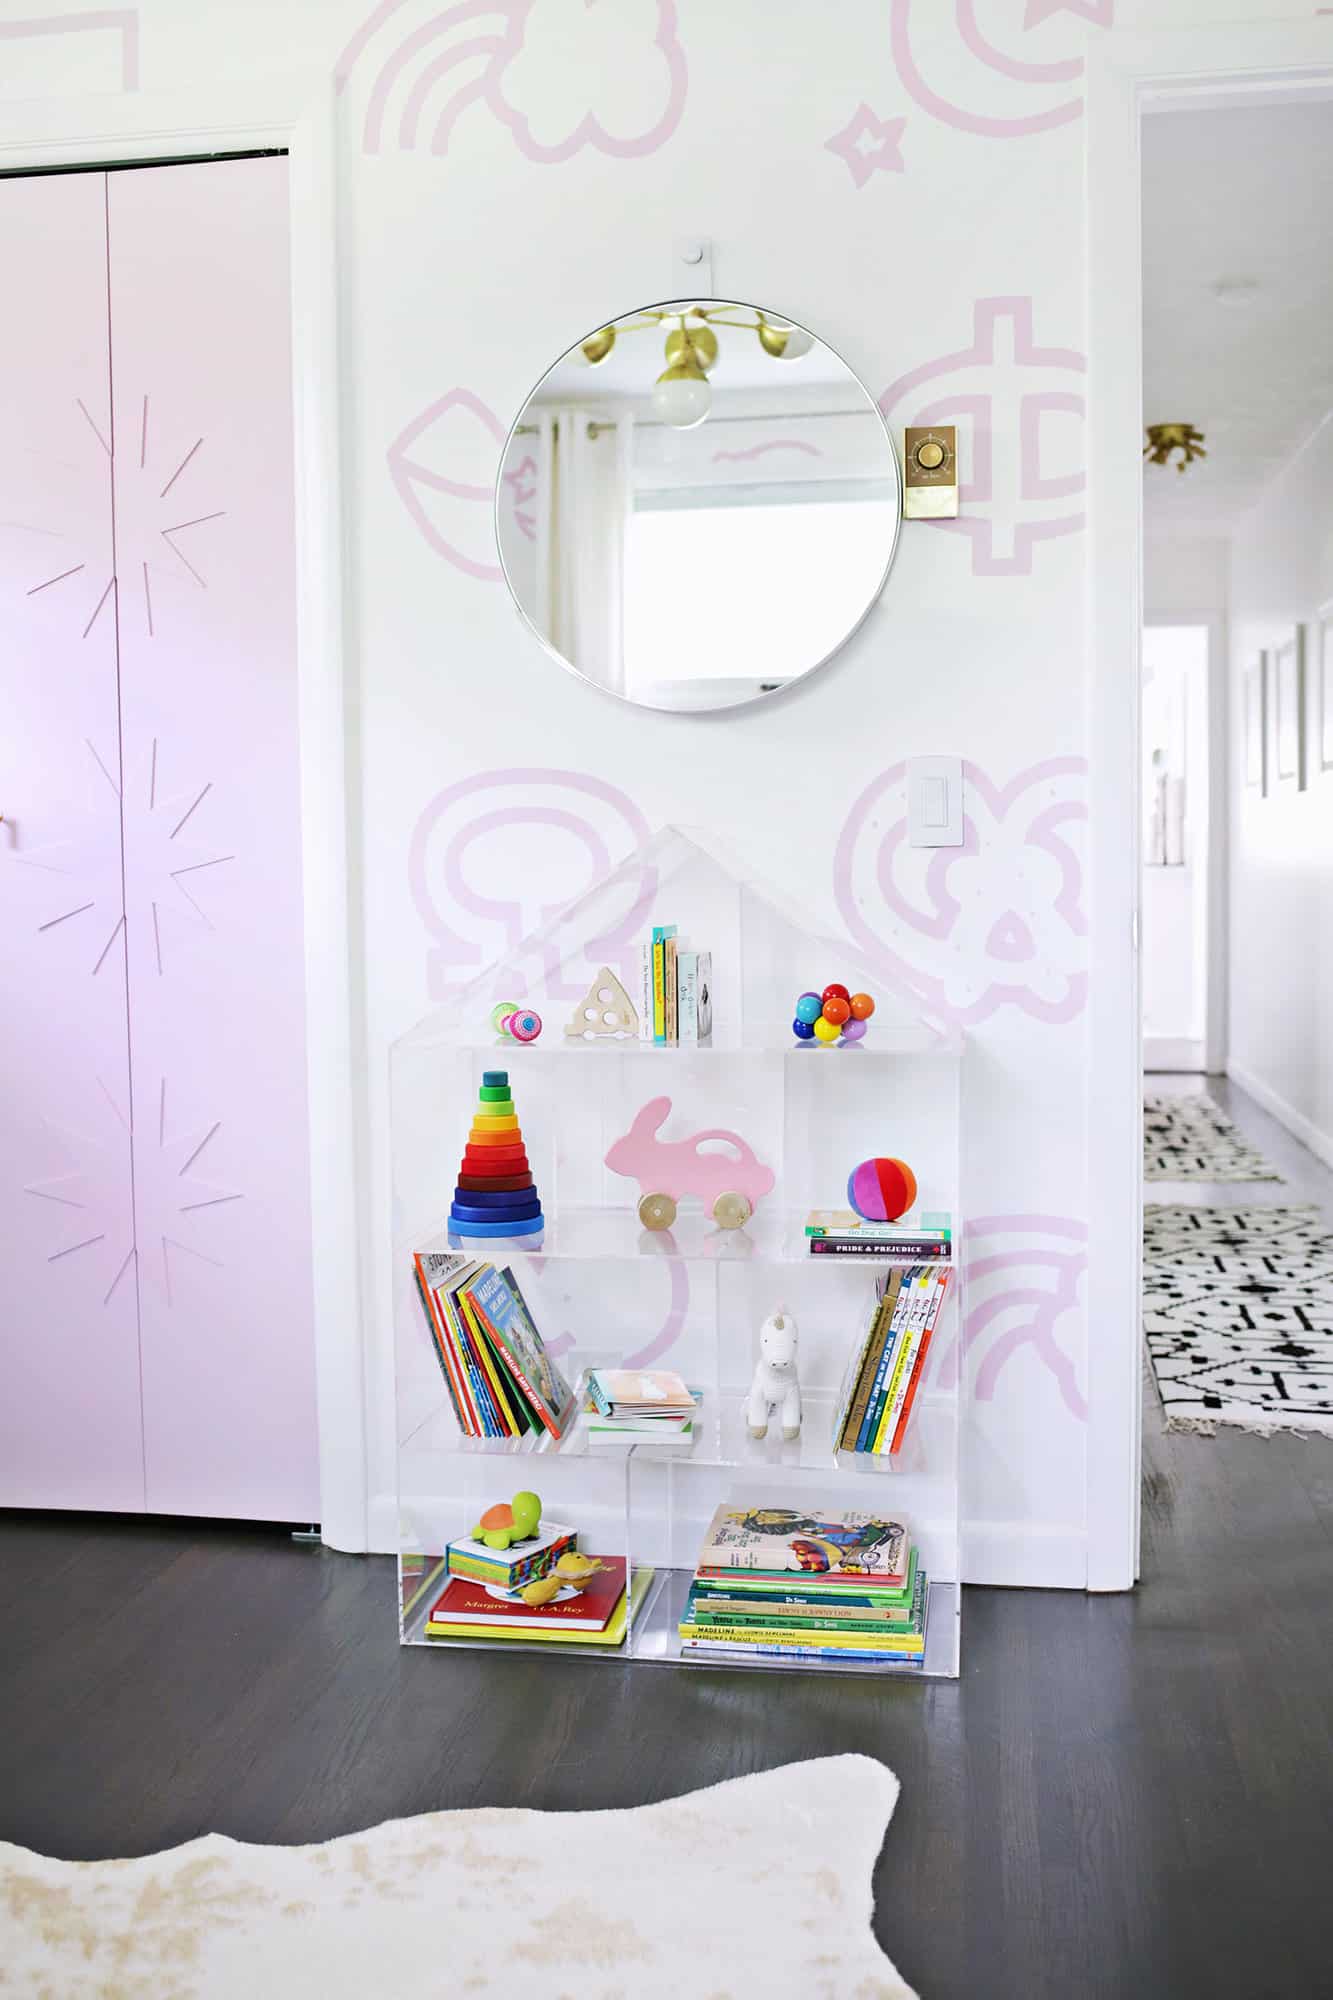 house shaped bookshelf with kid's books and toys on it